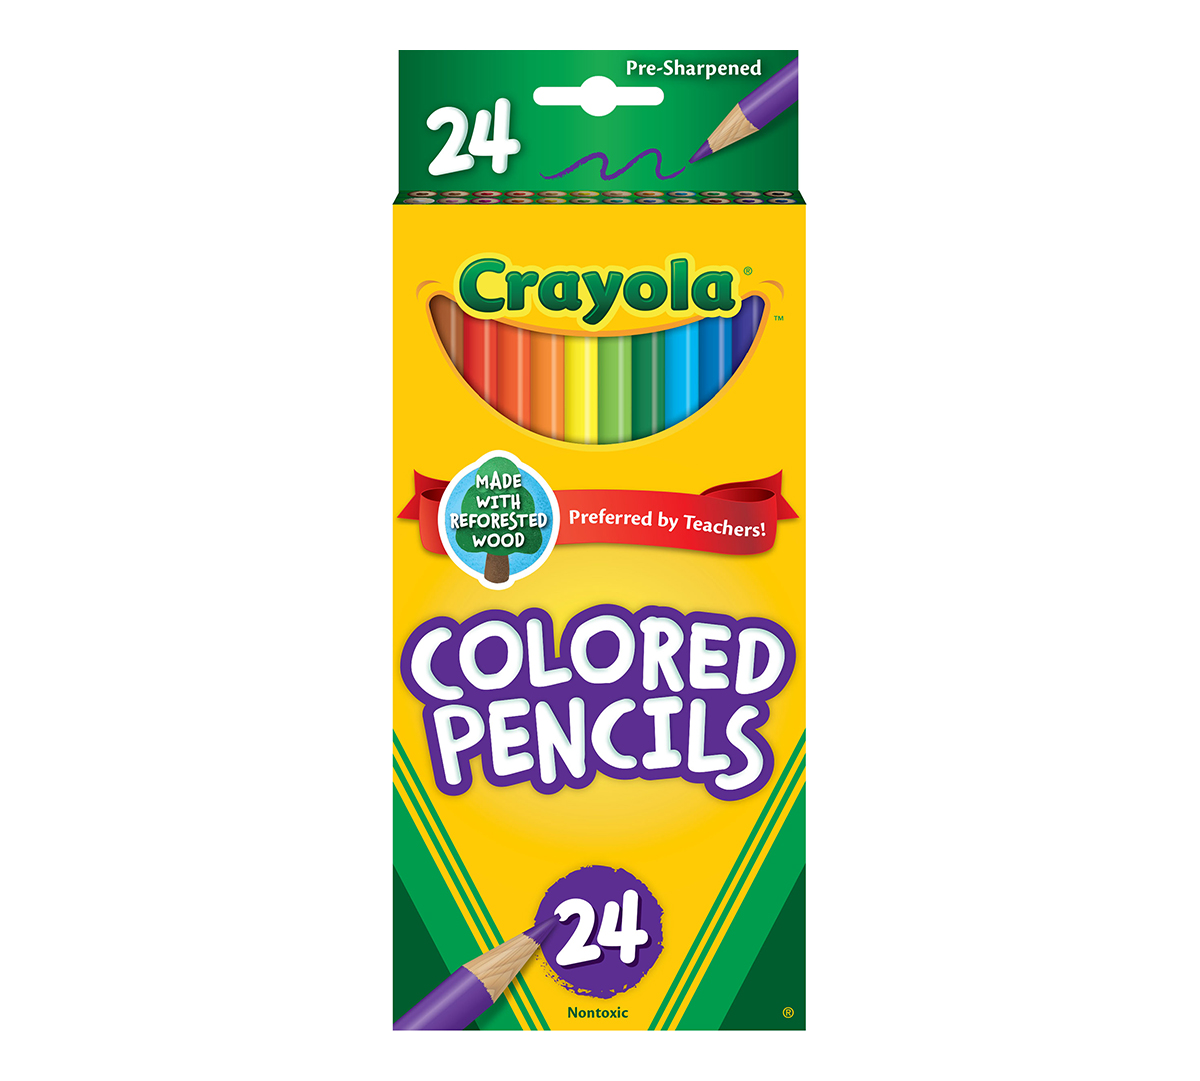 Complete List of Current Crayola Colored Pencil Colors  Crayola colored  pencils, Crayola pencils, Colored pencils